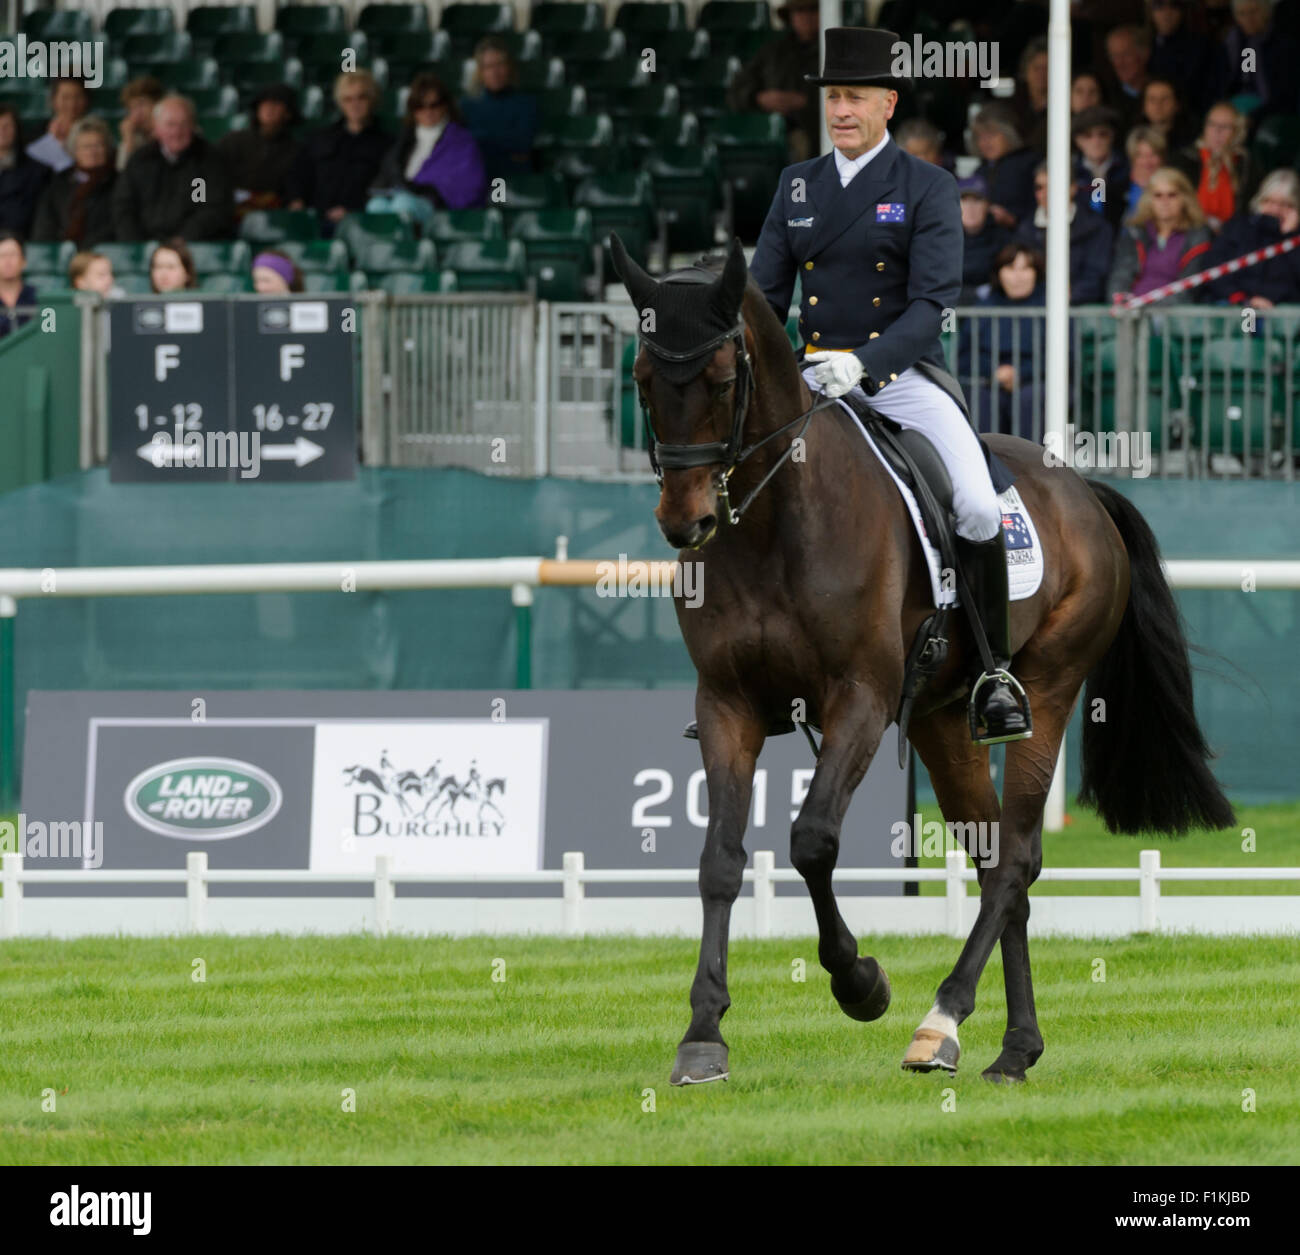 Burghley House, Stamford ,UK, 3rd Sept 2015. Andrew Hoy and RUTHERGLEN are in second place after day 1 of the dressage Phase of the Land Rover Burghley Horse Trials. Credit:  Nico Morgan/Alamy Live News Stock Photo